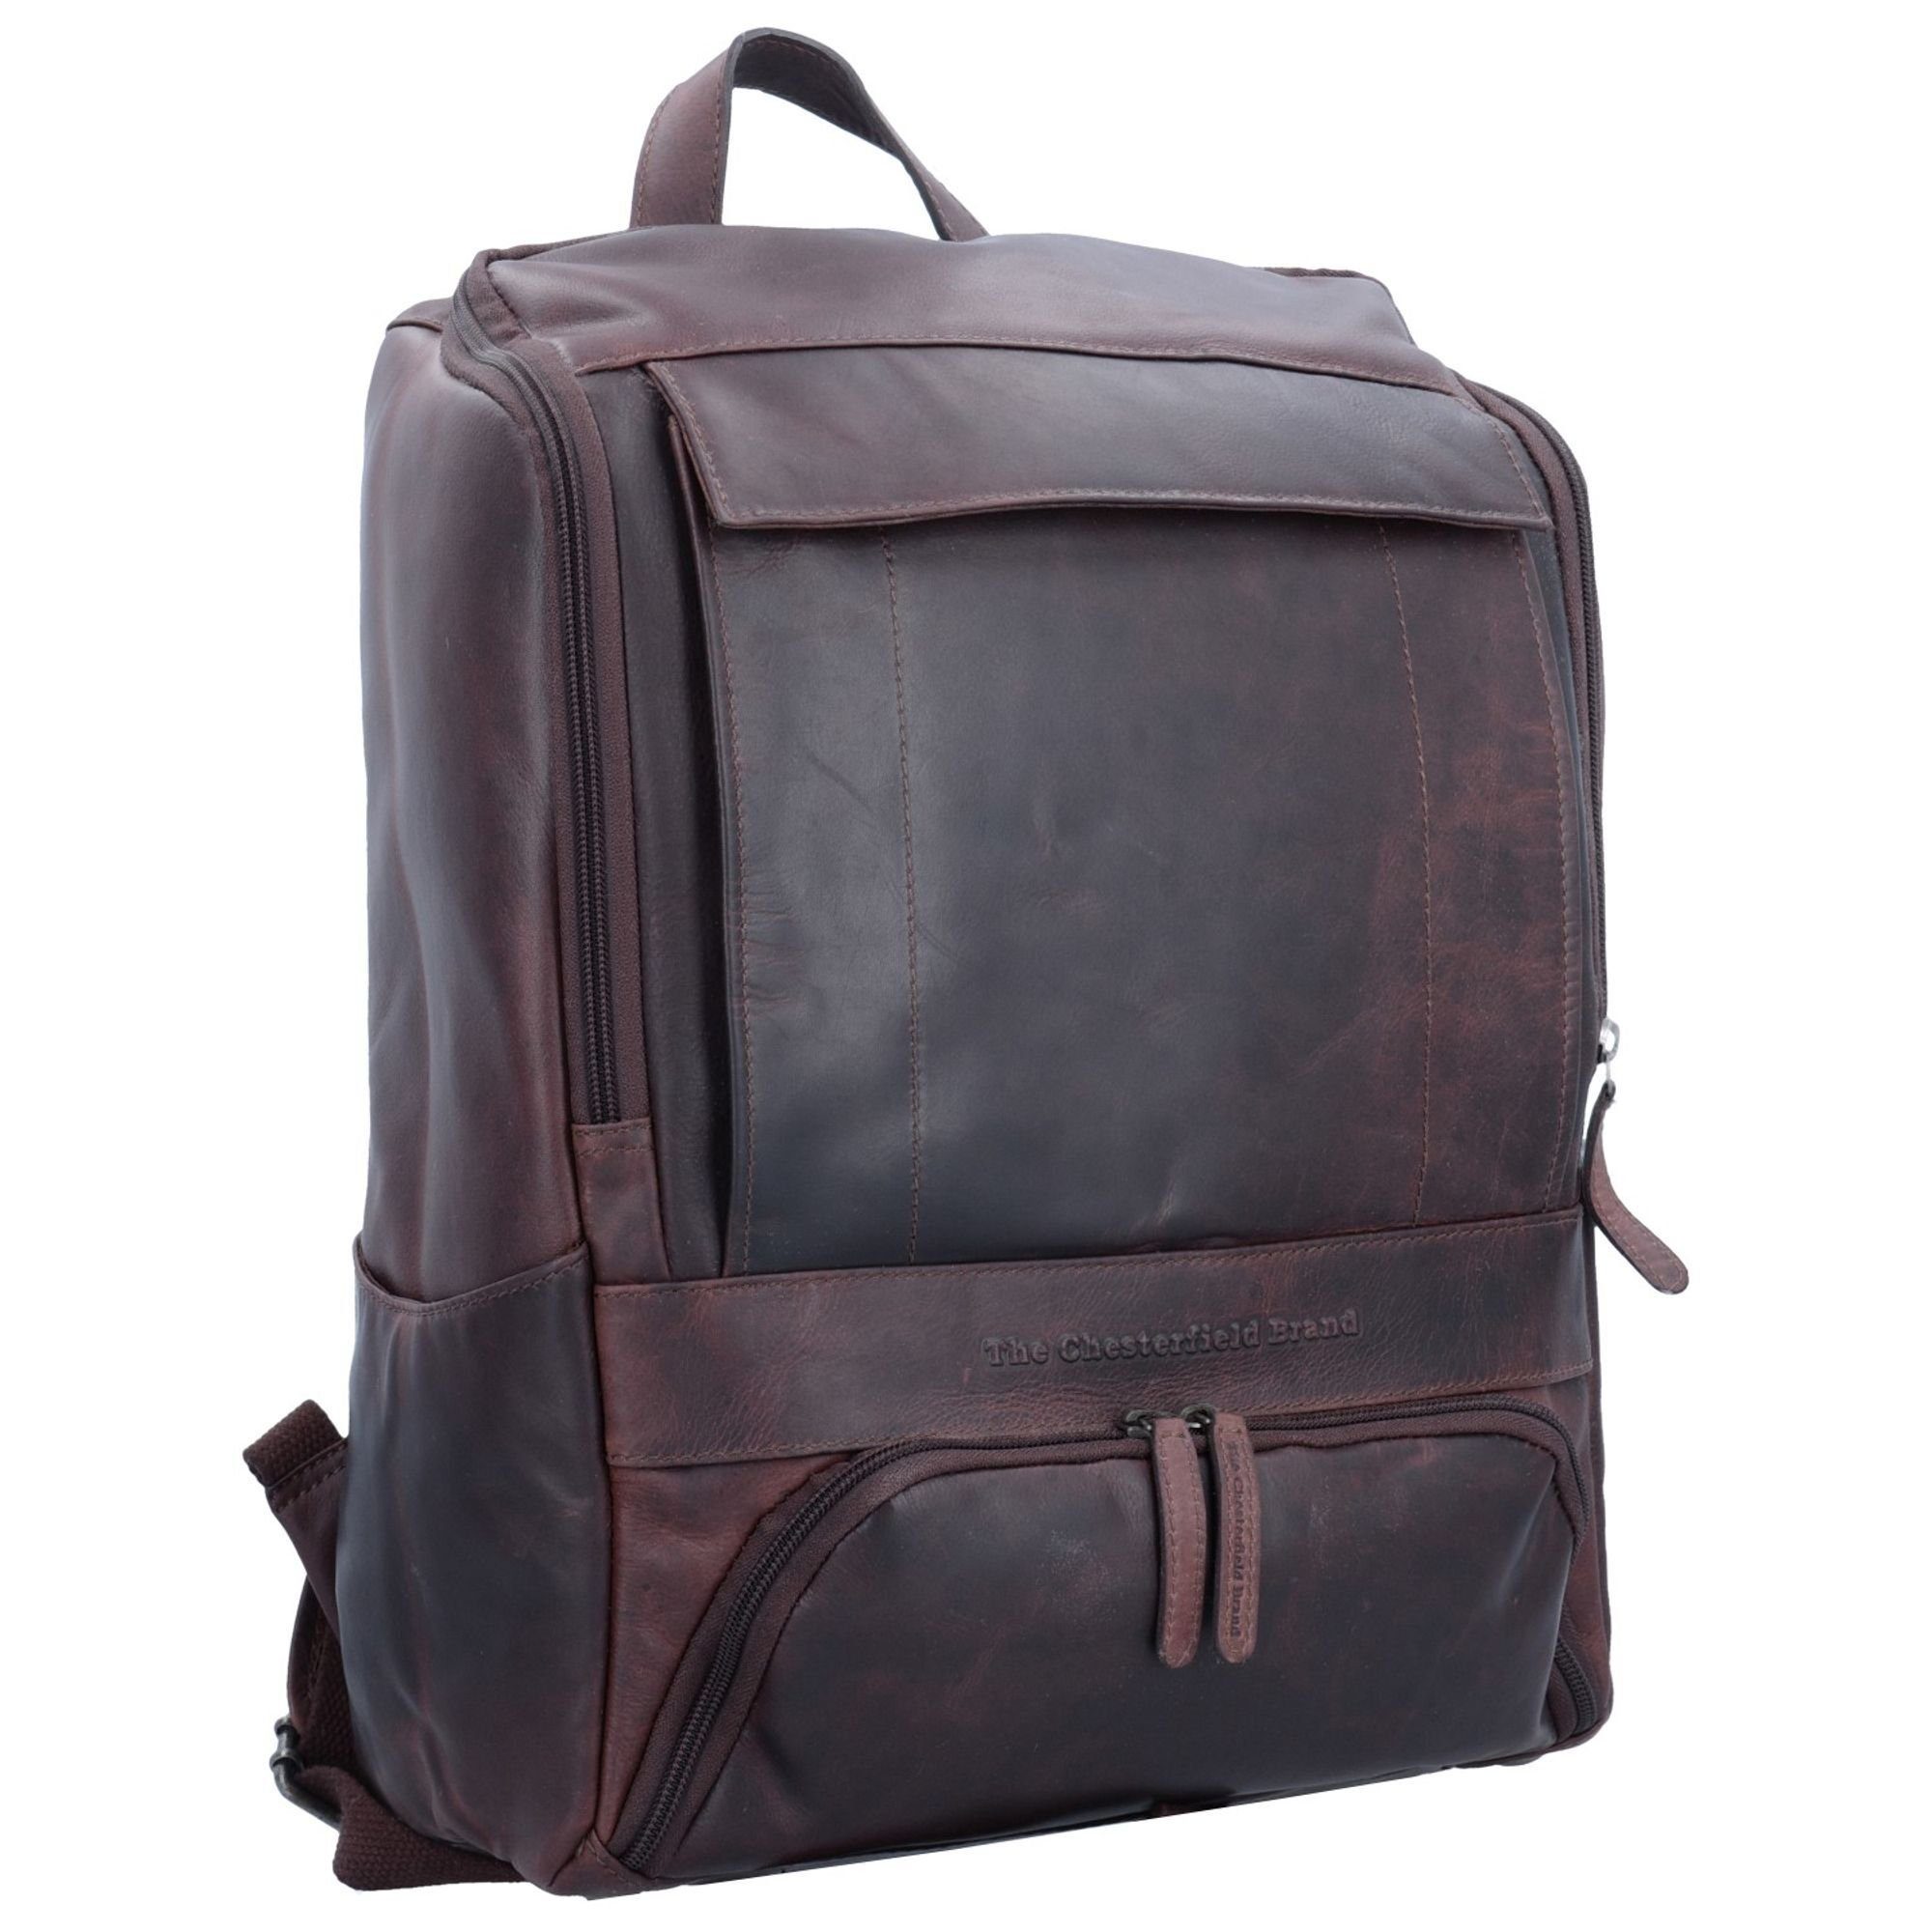 Laptoprucksack Brand Leder The brown Up, Wax Chesterfield Pull